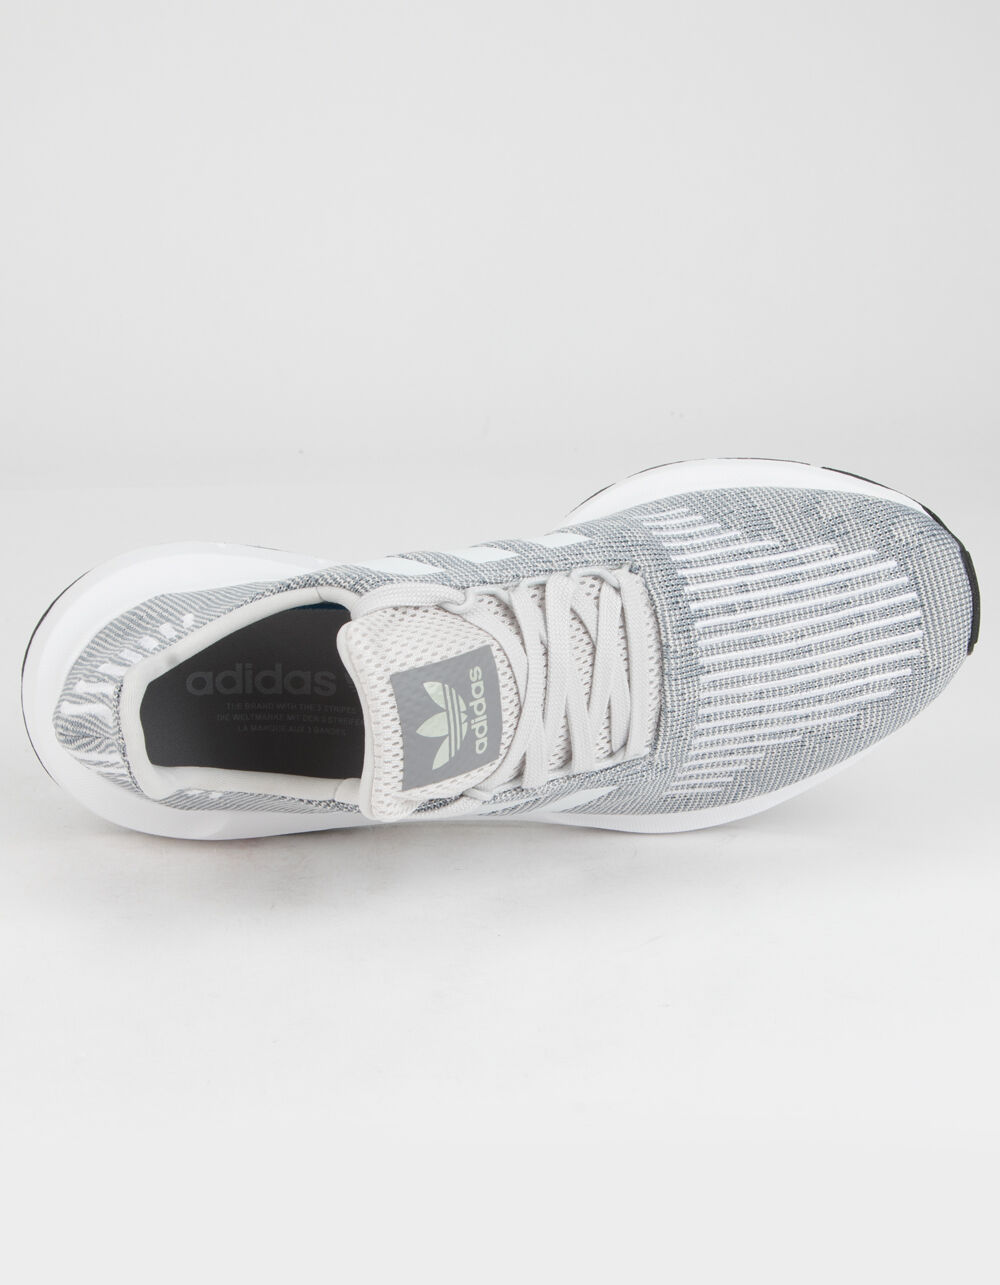 ADIDAS Swift Run Gray & White Shoes image number 2